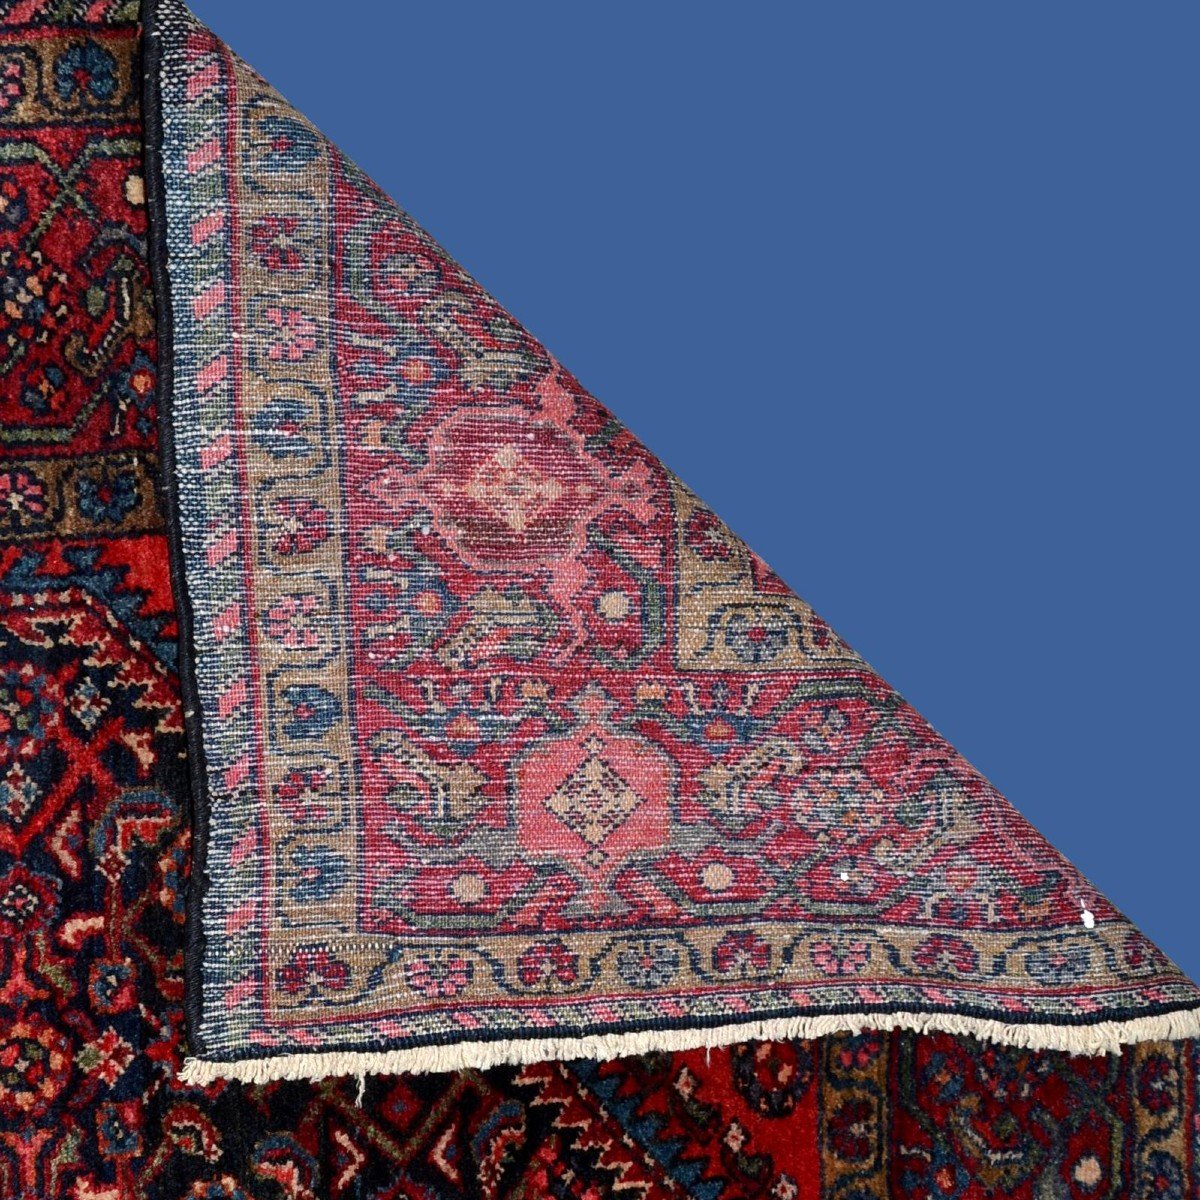 Malayer Rug, 150 X 217 Cm, Beautiful Persian In Hand-knotted Wool In Iran Circa 1970 In Very Good Condition-photo-7